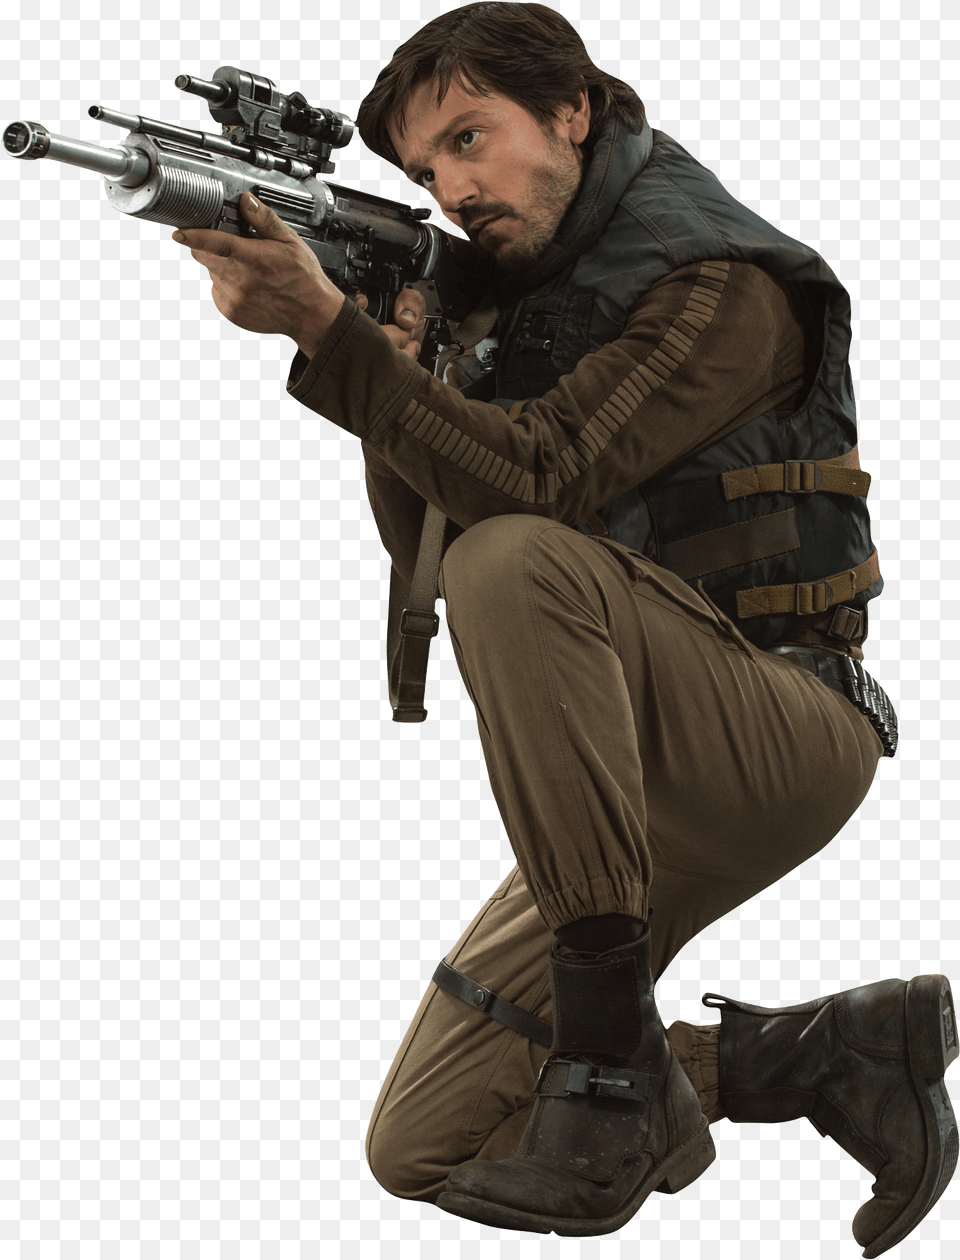 Diego Luna As Cassian Andor The Characters Of Rogue Rogue One Rebel Cosplay, Weapon, Firearm, Gun, Handgun Png Image